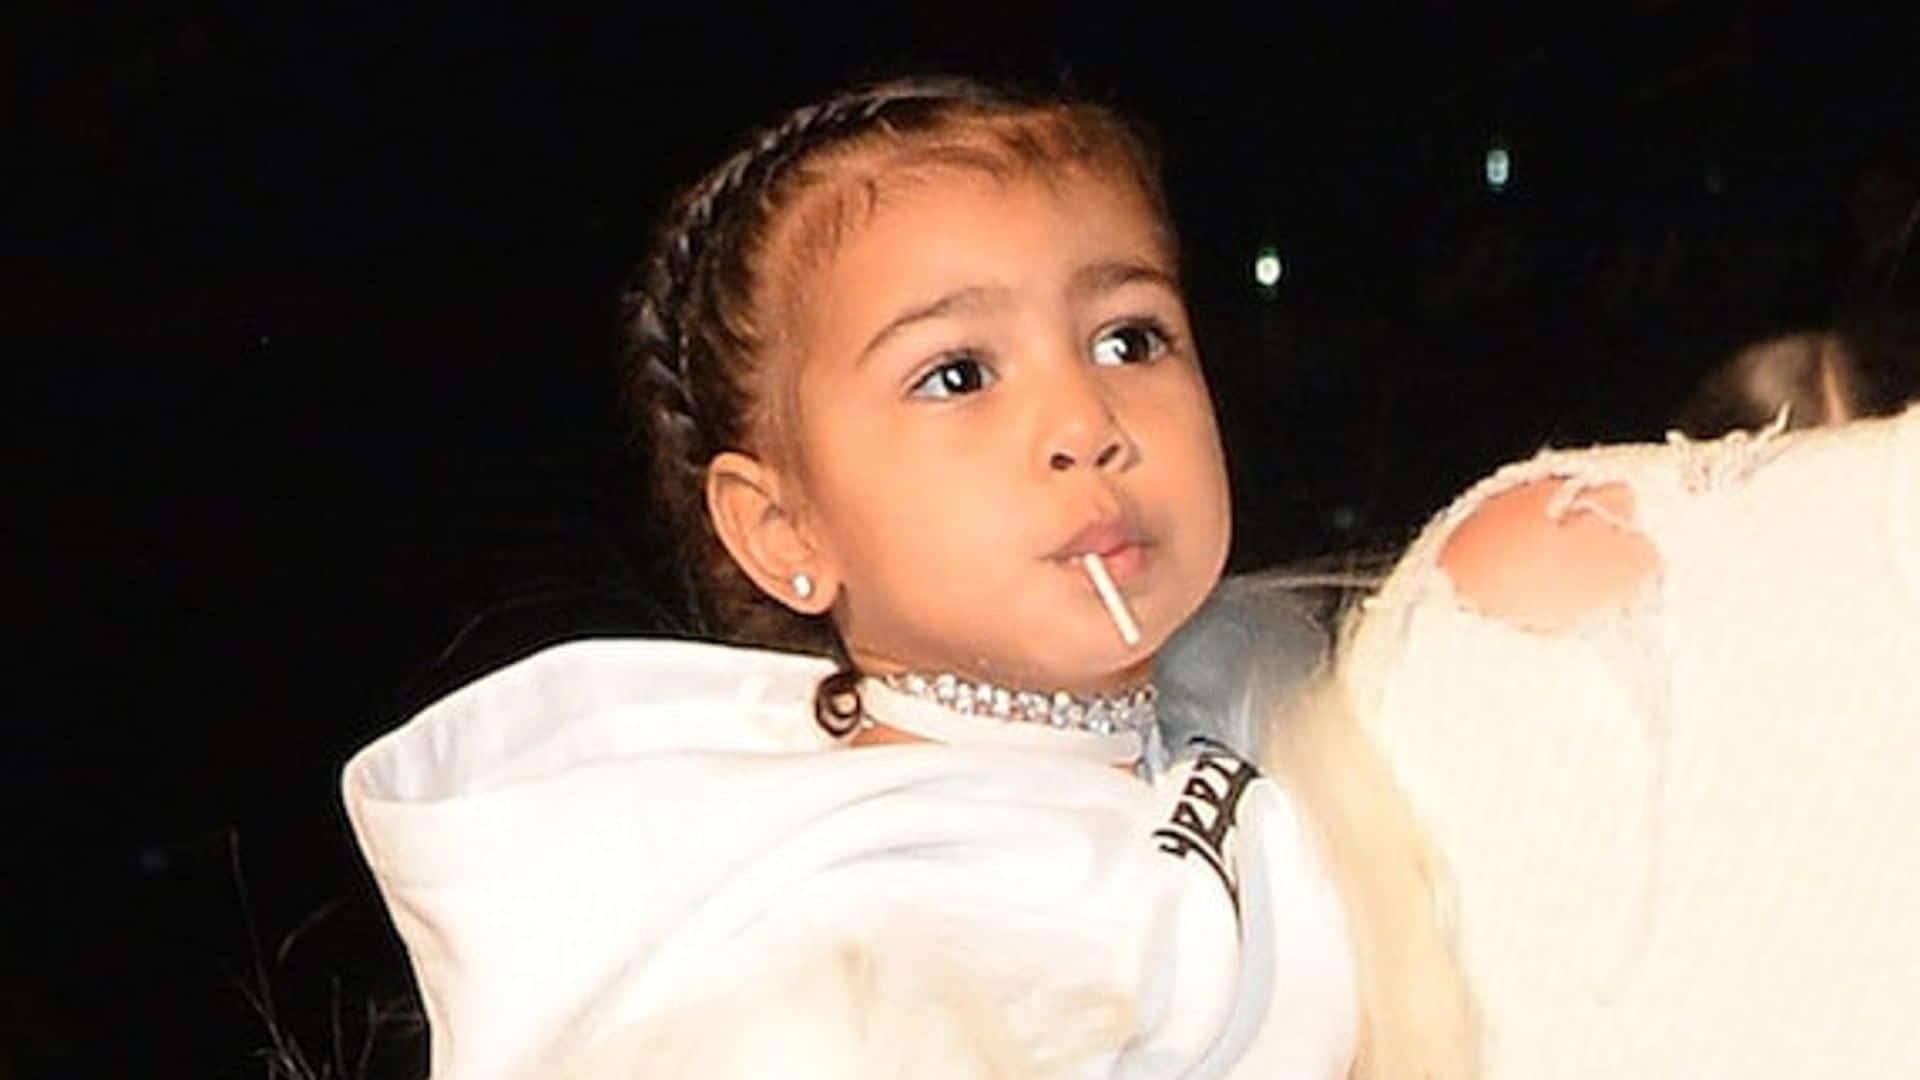 North West's beauty regimen includes contouring and a celebrity hairstylist